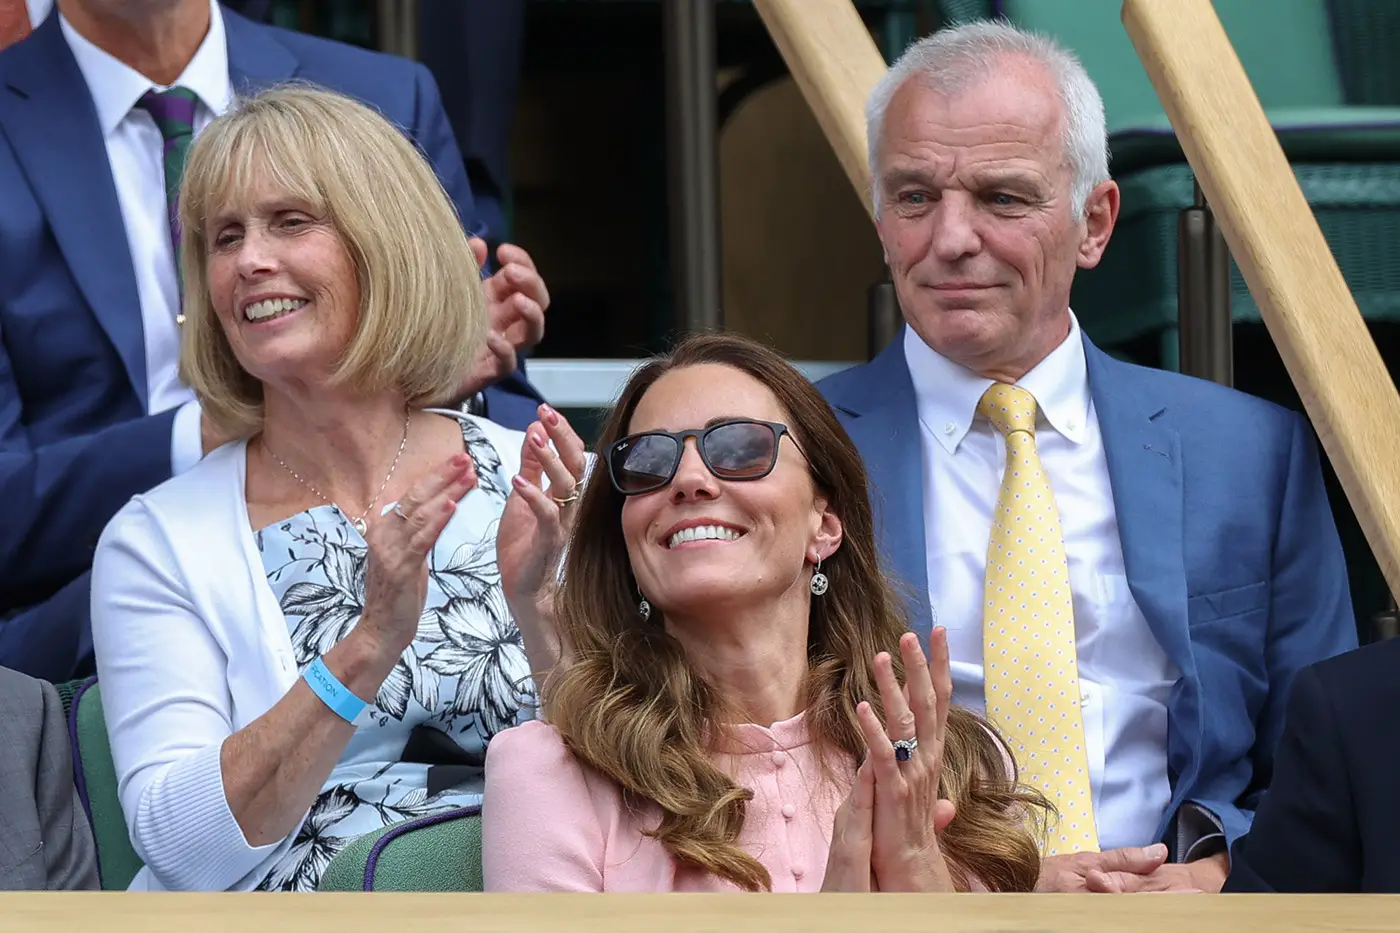 The Duchess of Cambridge was gorgeous in pink for Wimbledon 2021 Gentlemen's finale